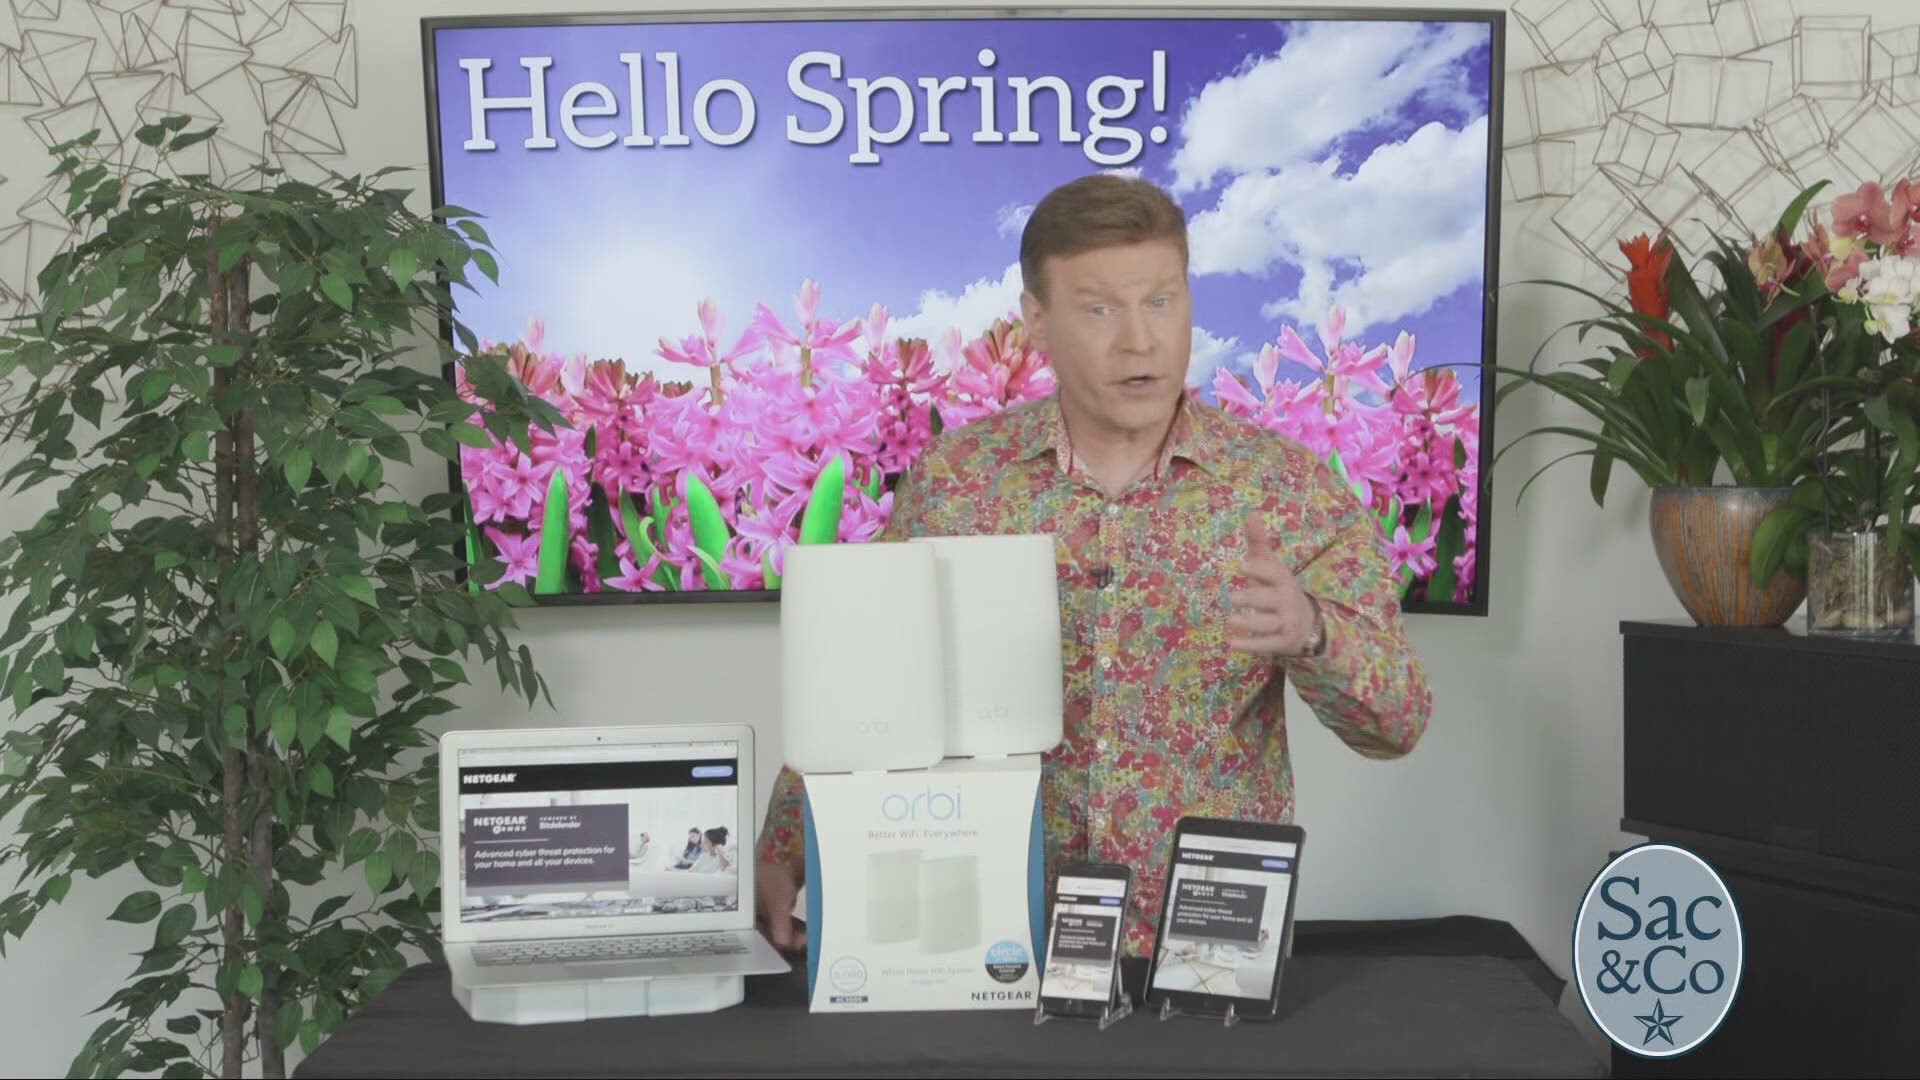 The Spring season typically coincides with new product launches to help us refresh our lives!  BehindTheBuy.com’s David Gregg always partners with leading companies to bring the best new product suggestions. The following is a paid segment sponsored by Consumer Product Newsgroup.